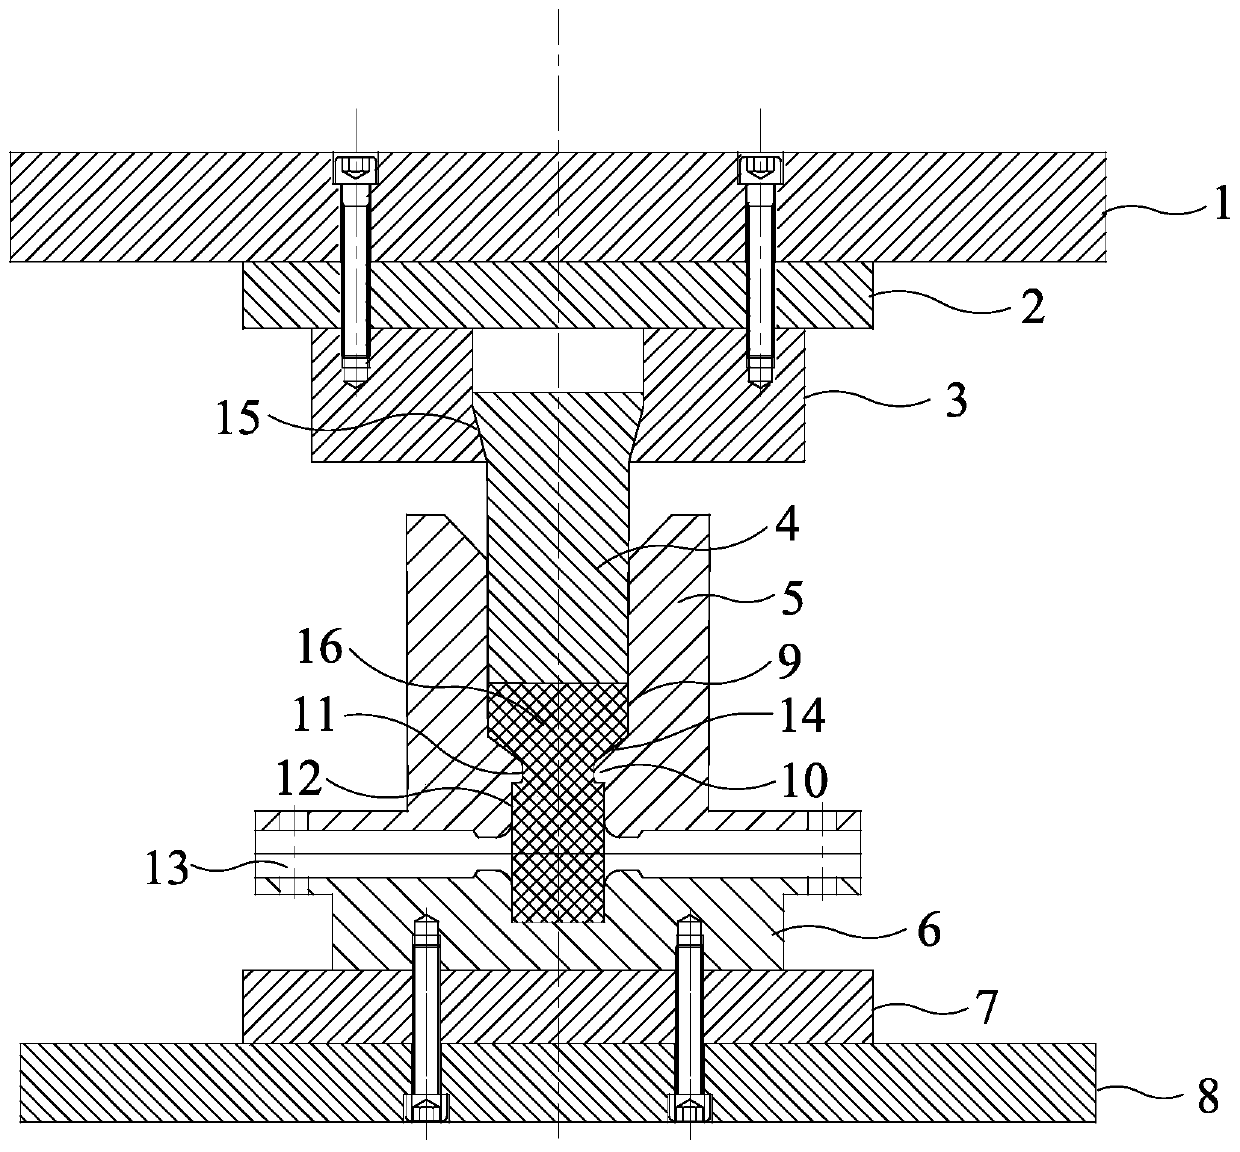 Large-deformation composite extrusion preparation method for magnesium alloy profile for vertical hydraulic machine